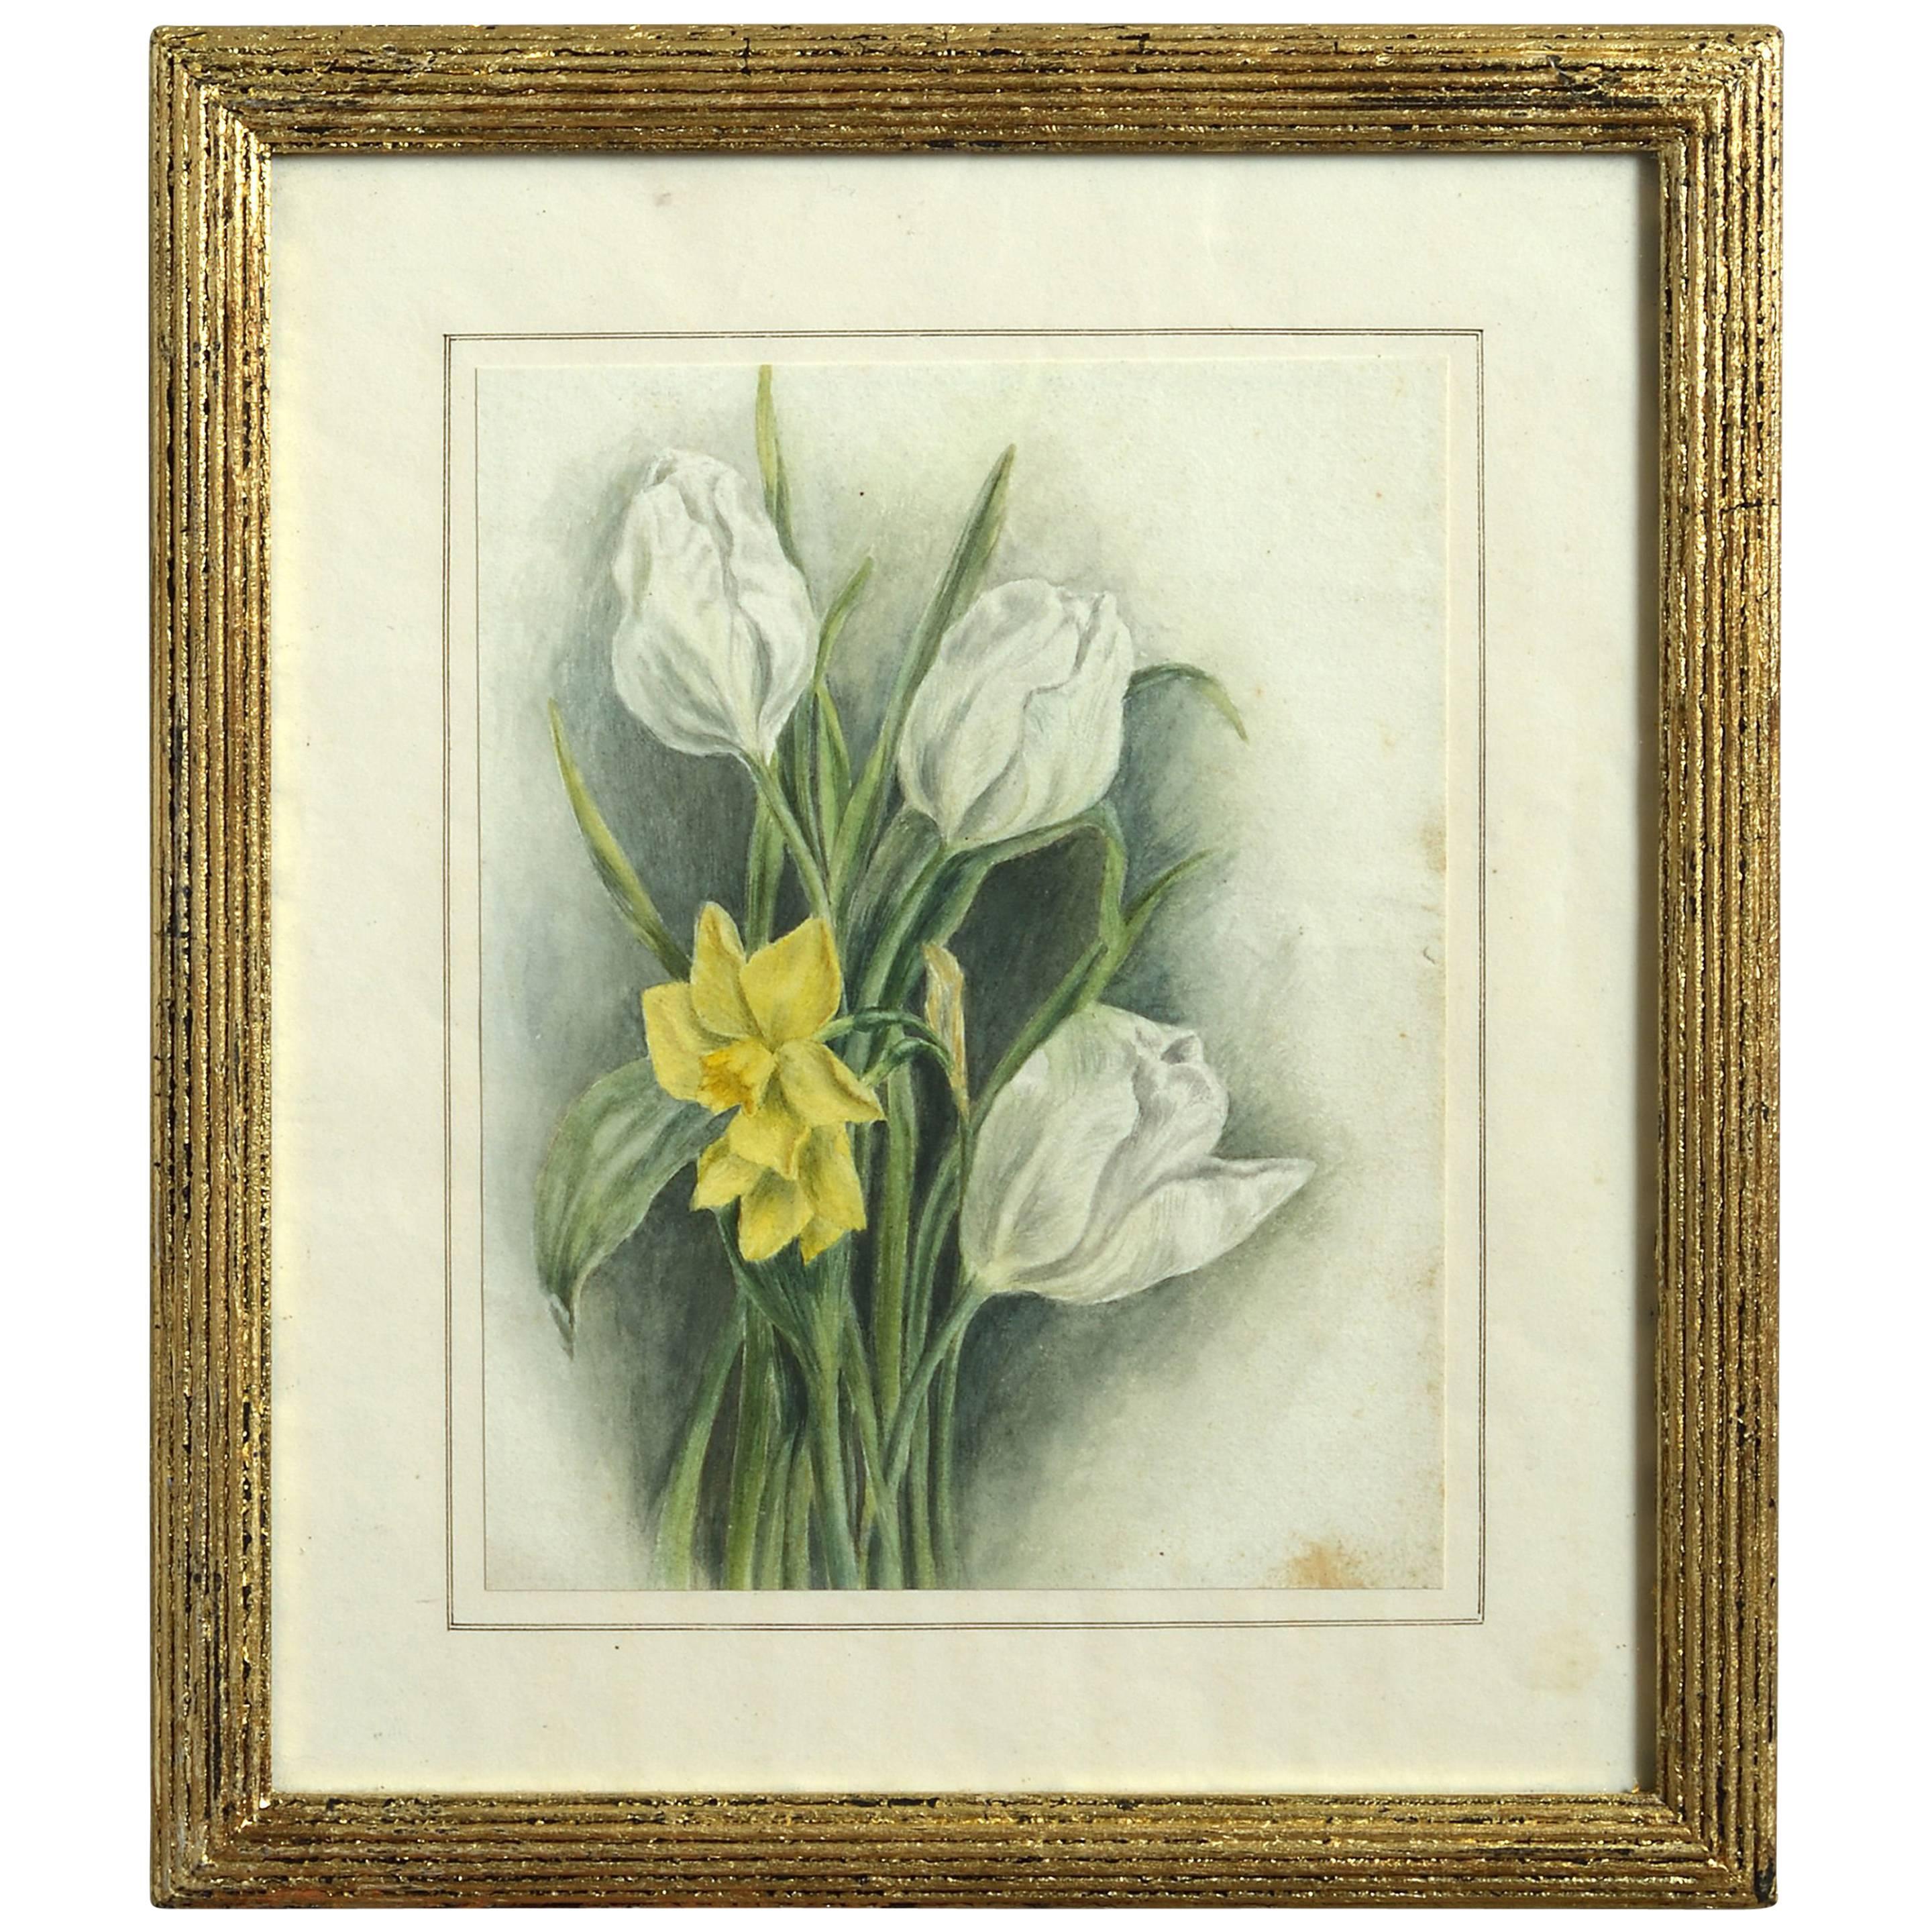 Late 19th Century Watercolor Study of a Daffodil and Tulipos